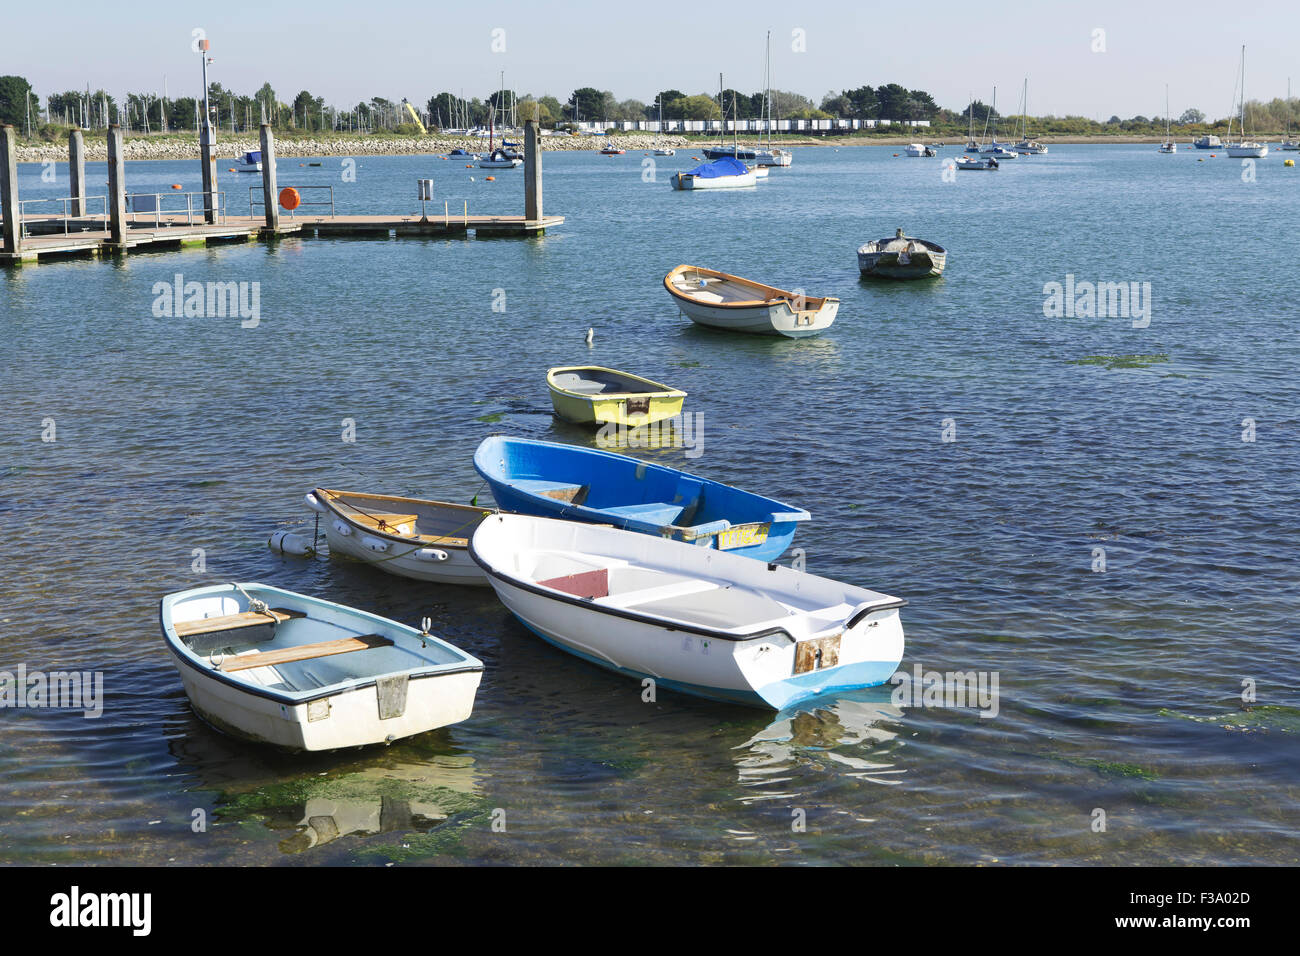 Collection of small boats or tenders in Chichester harbour at Emsworth. Boats forming an informal line front left to rear right. Stock Photo